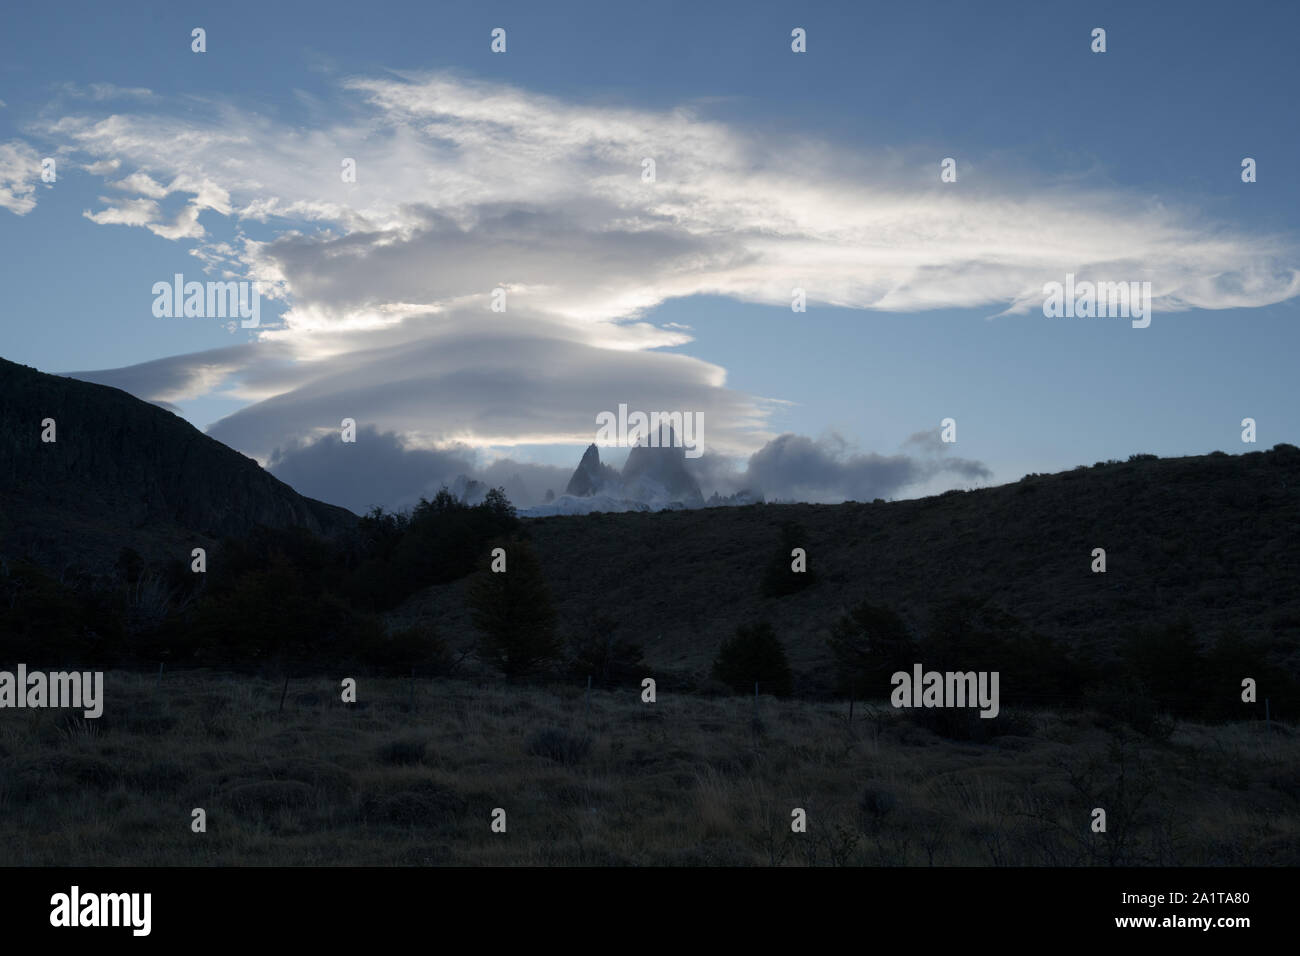 View of Mount FitzRoy with lenticular clouds above during early sunset.ii Stock Photo